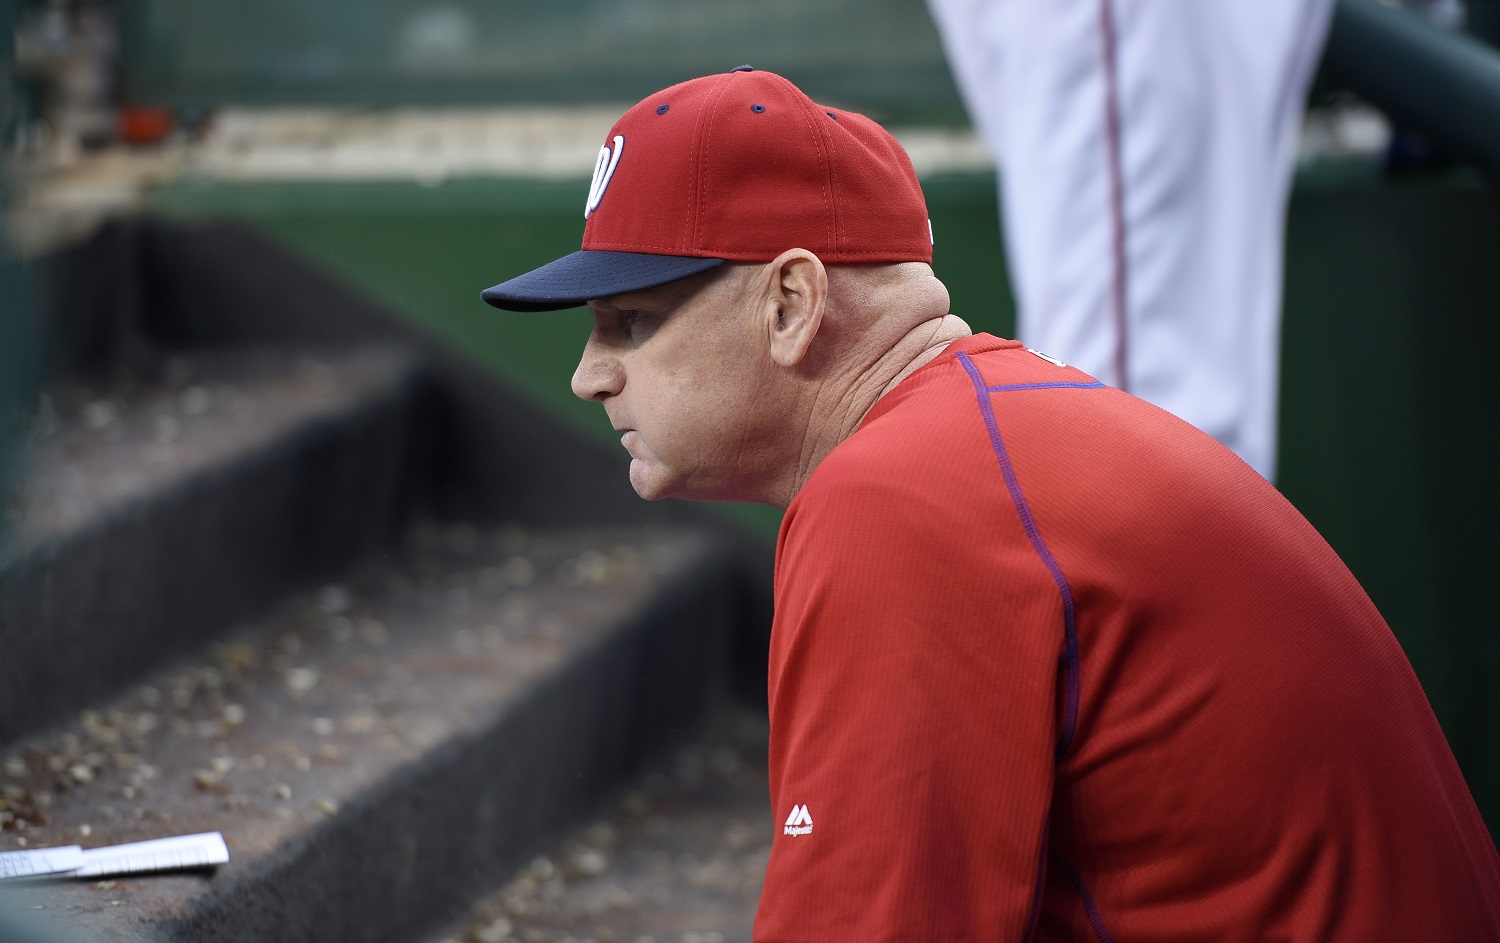 Washington Nationals manager Matt Williams looks on during a baseball game against the Philadelphia Phillies, Saturday, Sept. 26, 2015, in Washington. The Nationals won 2-1 in 12 innings. (AP Photo/Nick Wass)